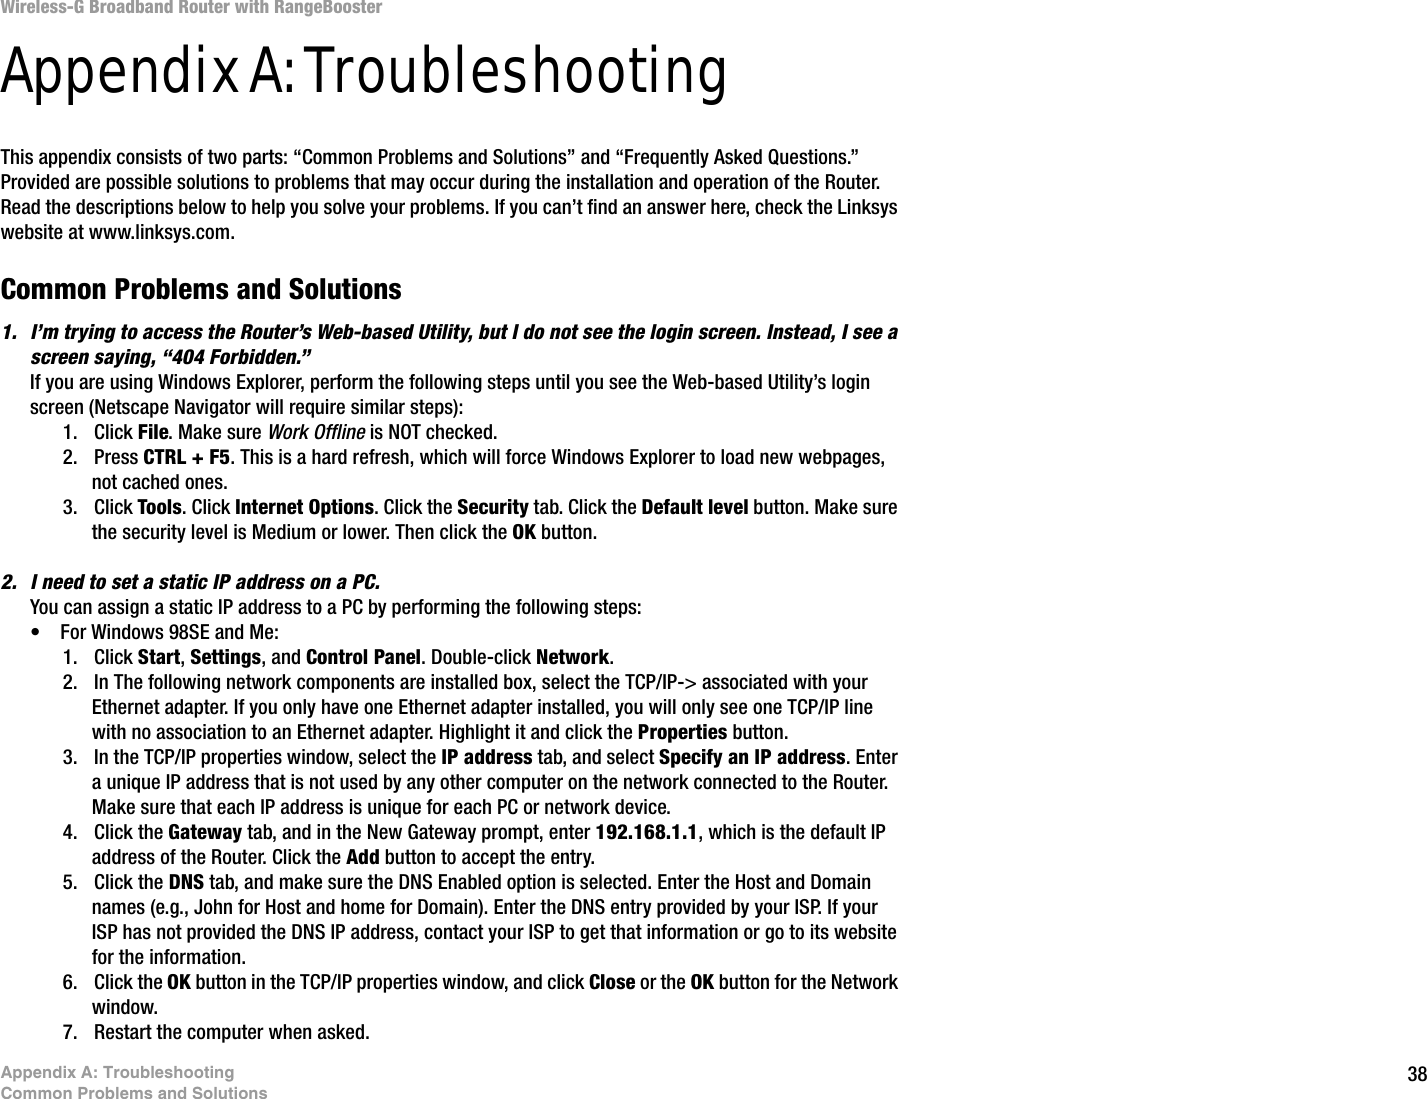 38Appendix A: TroubleshootingCommon Problems and SolutionsWireless-G Broadband Router with RangeBoosterAppendix A: TroubleshootingThis appendix consists of two parts: “Common Problems and Solutions” and “Frequently Asked Questions.” Provided are possible solutions to problems that may occur during the installation and operation of the Router. Read the descriptions below to help you solve your problems. If you can’t find an answer here, check the Linksys website at www.linksys.com.Common Problems and Solutions1. I’m trying to access the Router’s Web-based Utility, but I do not see the login screen. Instead, I see a screen saying, “404 Forbidden.”If you are using Windows Explorer, perform the following steps until you see the Web-based Utility’s login screen (Netscape Navigator will require similar steps):1. Click File. Make sure Work Offline is NOT checked.2. Press CTRL + F5. This is a hard refresh, which will force Windows Explorer to load new webpages, not cached ones.3. Click Tools. Click Internet Options. Click the Security tab. Click the Default level button. Make sure the security level is Medium or lower. Then click the OK button.2. I need to set a static IP address on a PC.You can assign a static IP address to a PC by performing the following steps:• For Windows 98SE and Me:1. Click Start, Settings, and Control Panel. Double-click Network.2. In The following network components are installed box, select the TCP/IP-&gt; associated with your Ethernet adapter. If you only have one Ethernet adapter installed, you will only see one TCP/IP line with no association to an Ethernet adapter. Highlight it and click the Properties button.3. In the TCP/IP properties window, select the IP address tab, and select Specify an IP address. Enter a unique IP address that is not used by any other computer on the network connected to the Router. Make sure that each IP address is unique for each PC or network device.4. Click the Gateway tab, and in the New Gateway prompt, enter 192.168.1.1, which is the default IP address of the Router. Click the Add button to accept the entry.5. Click the DNS tab, and make sure the DNS Enabled option is selected. Enter the Host and Domain names (e.g., John for Host and home for Domain). Enter the DNS entry provided by your ISP. If your ISP has not provided the DNS IP address, contact your ISP to get that information or go to its website for the information.6. Click the OK button in the TCP/IP properties window, and click Close or the OK button for the Network window.7. Restart the computer when asked.